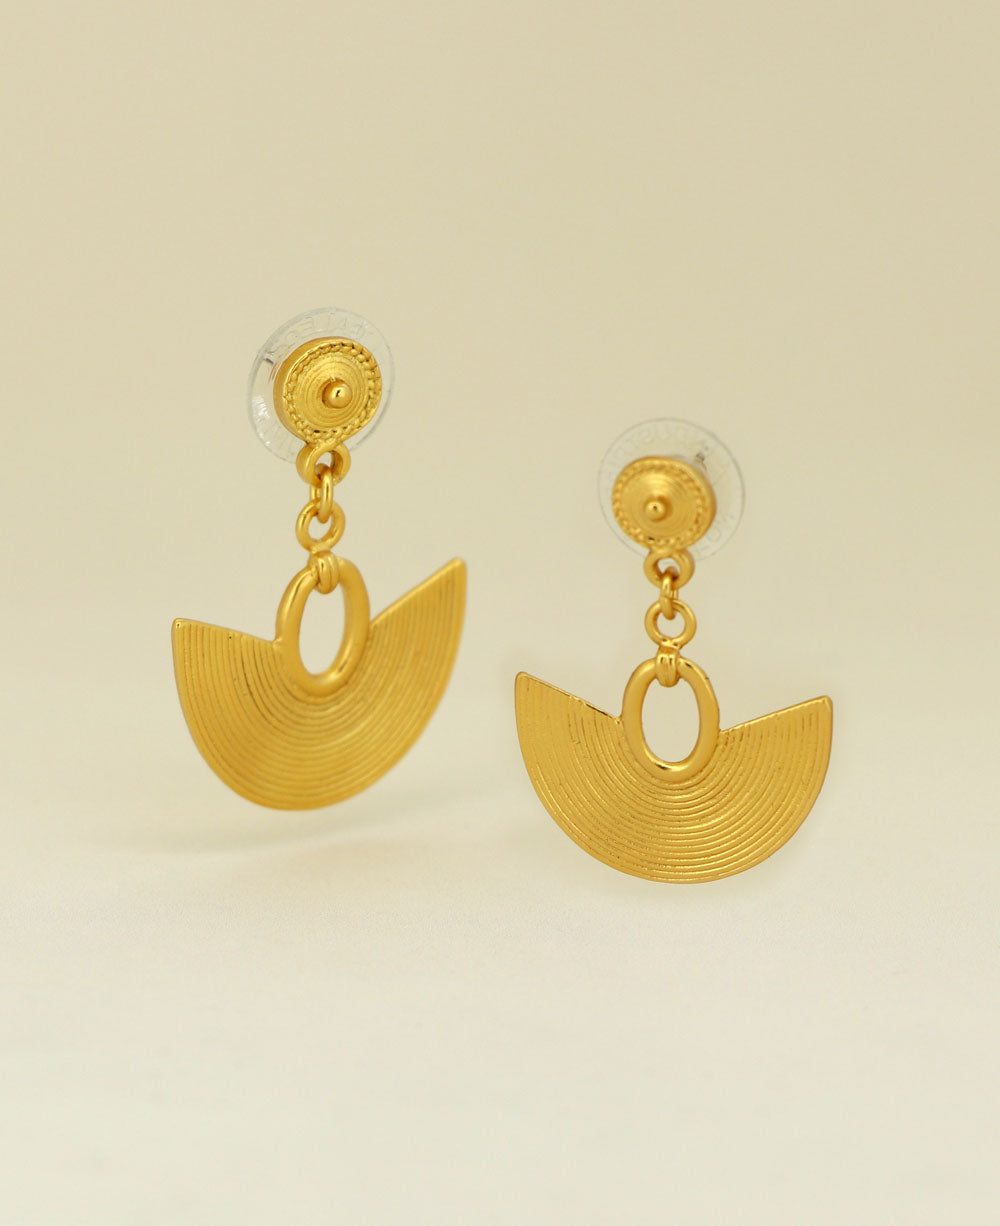 Close-up view of the Gold Plated Sinu Symbol Earrings, displaying the intricate details and premium gold plating